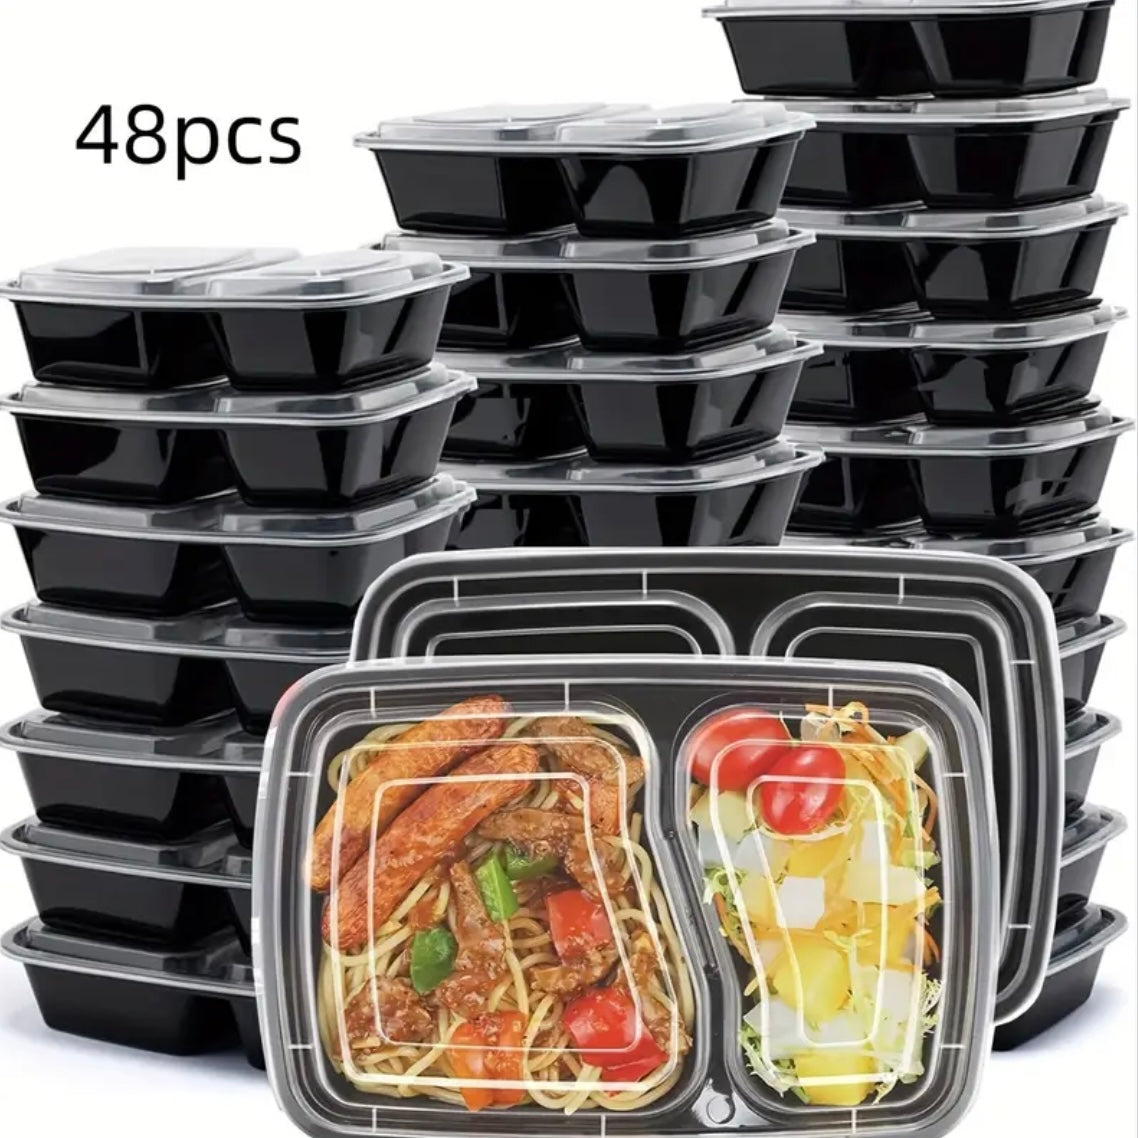 48pc Meal Prep Food Storage Containers 28oz - Reusable 2 Compartment